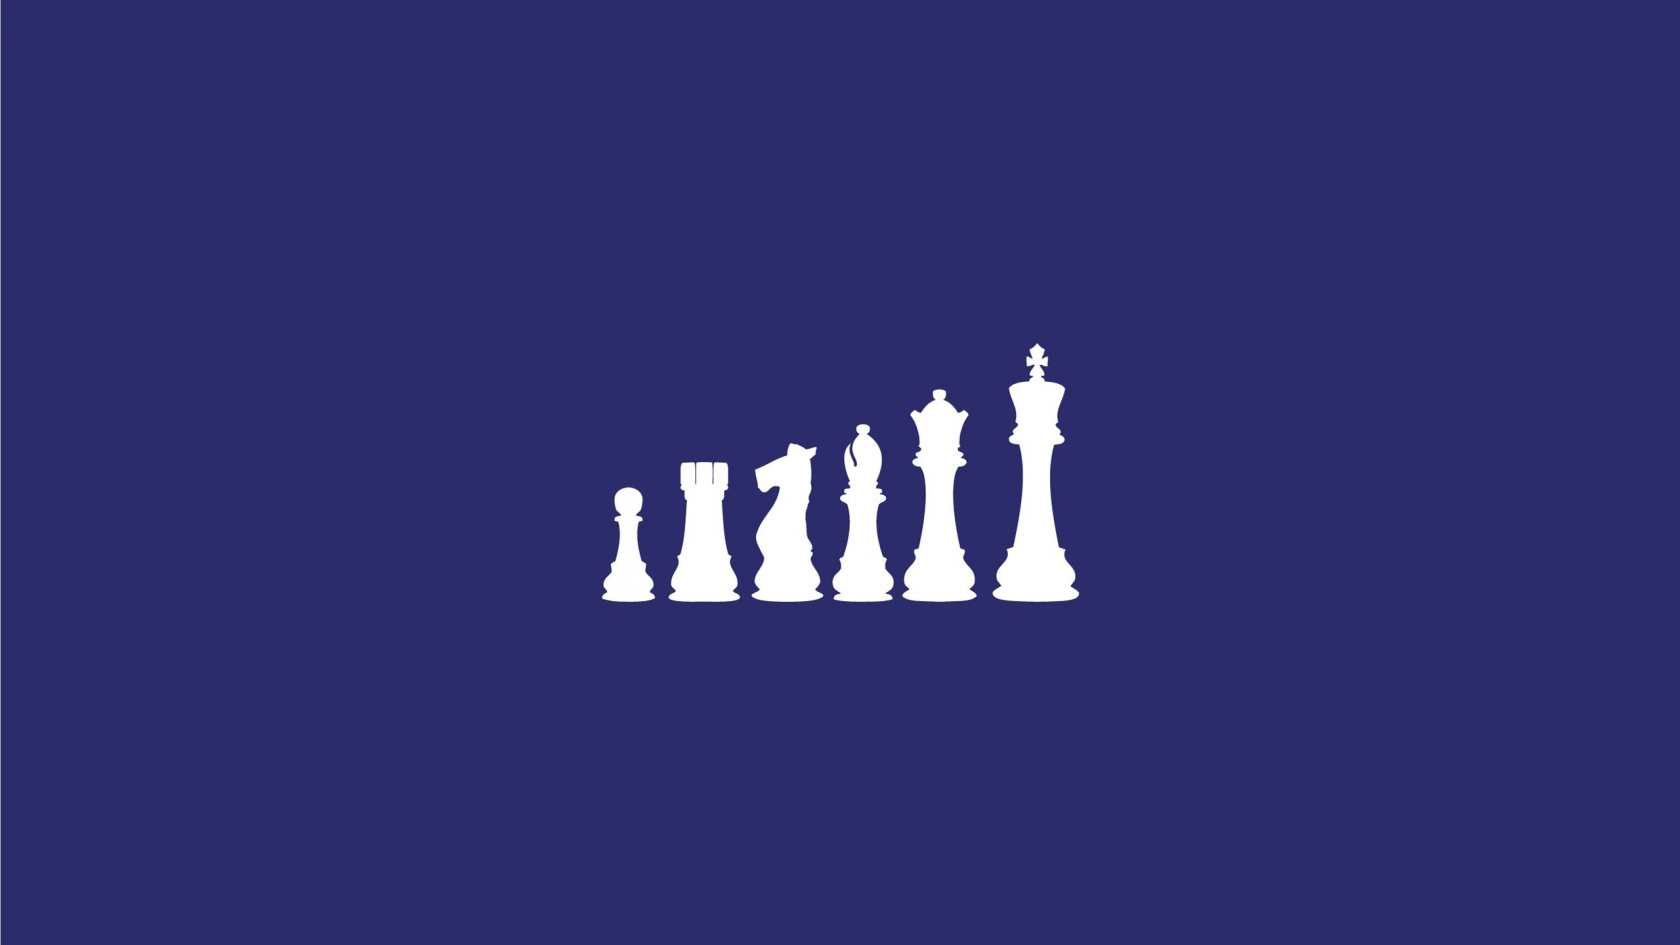 Chess Figures for 1680 x 945 HDTV resolution